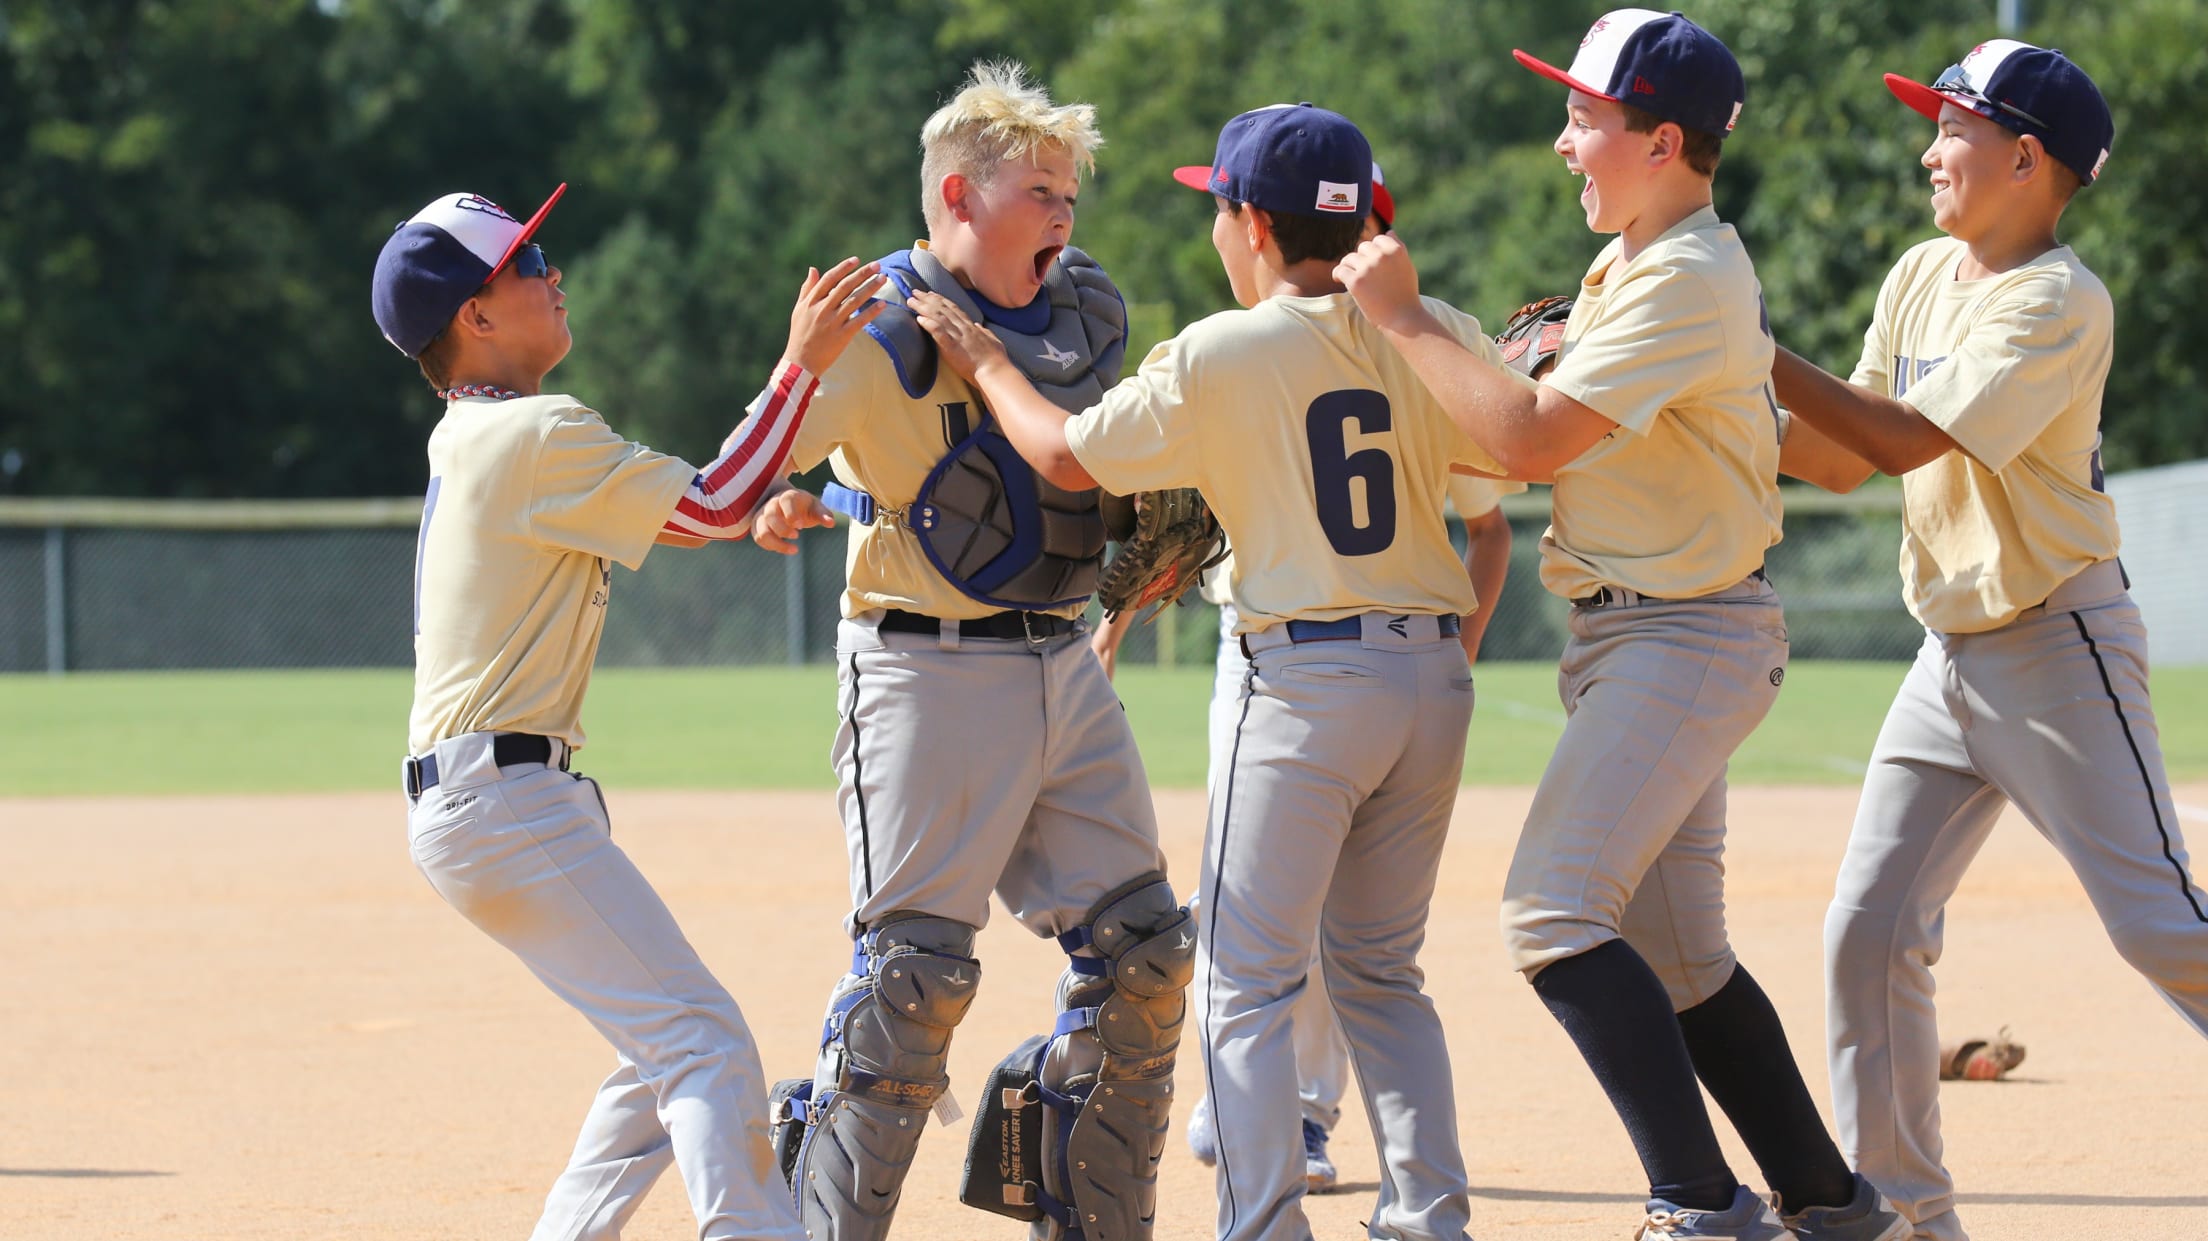 Southern California Claims 11U NTIS Title in Extras USA Baseball